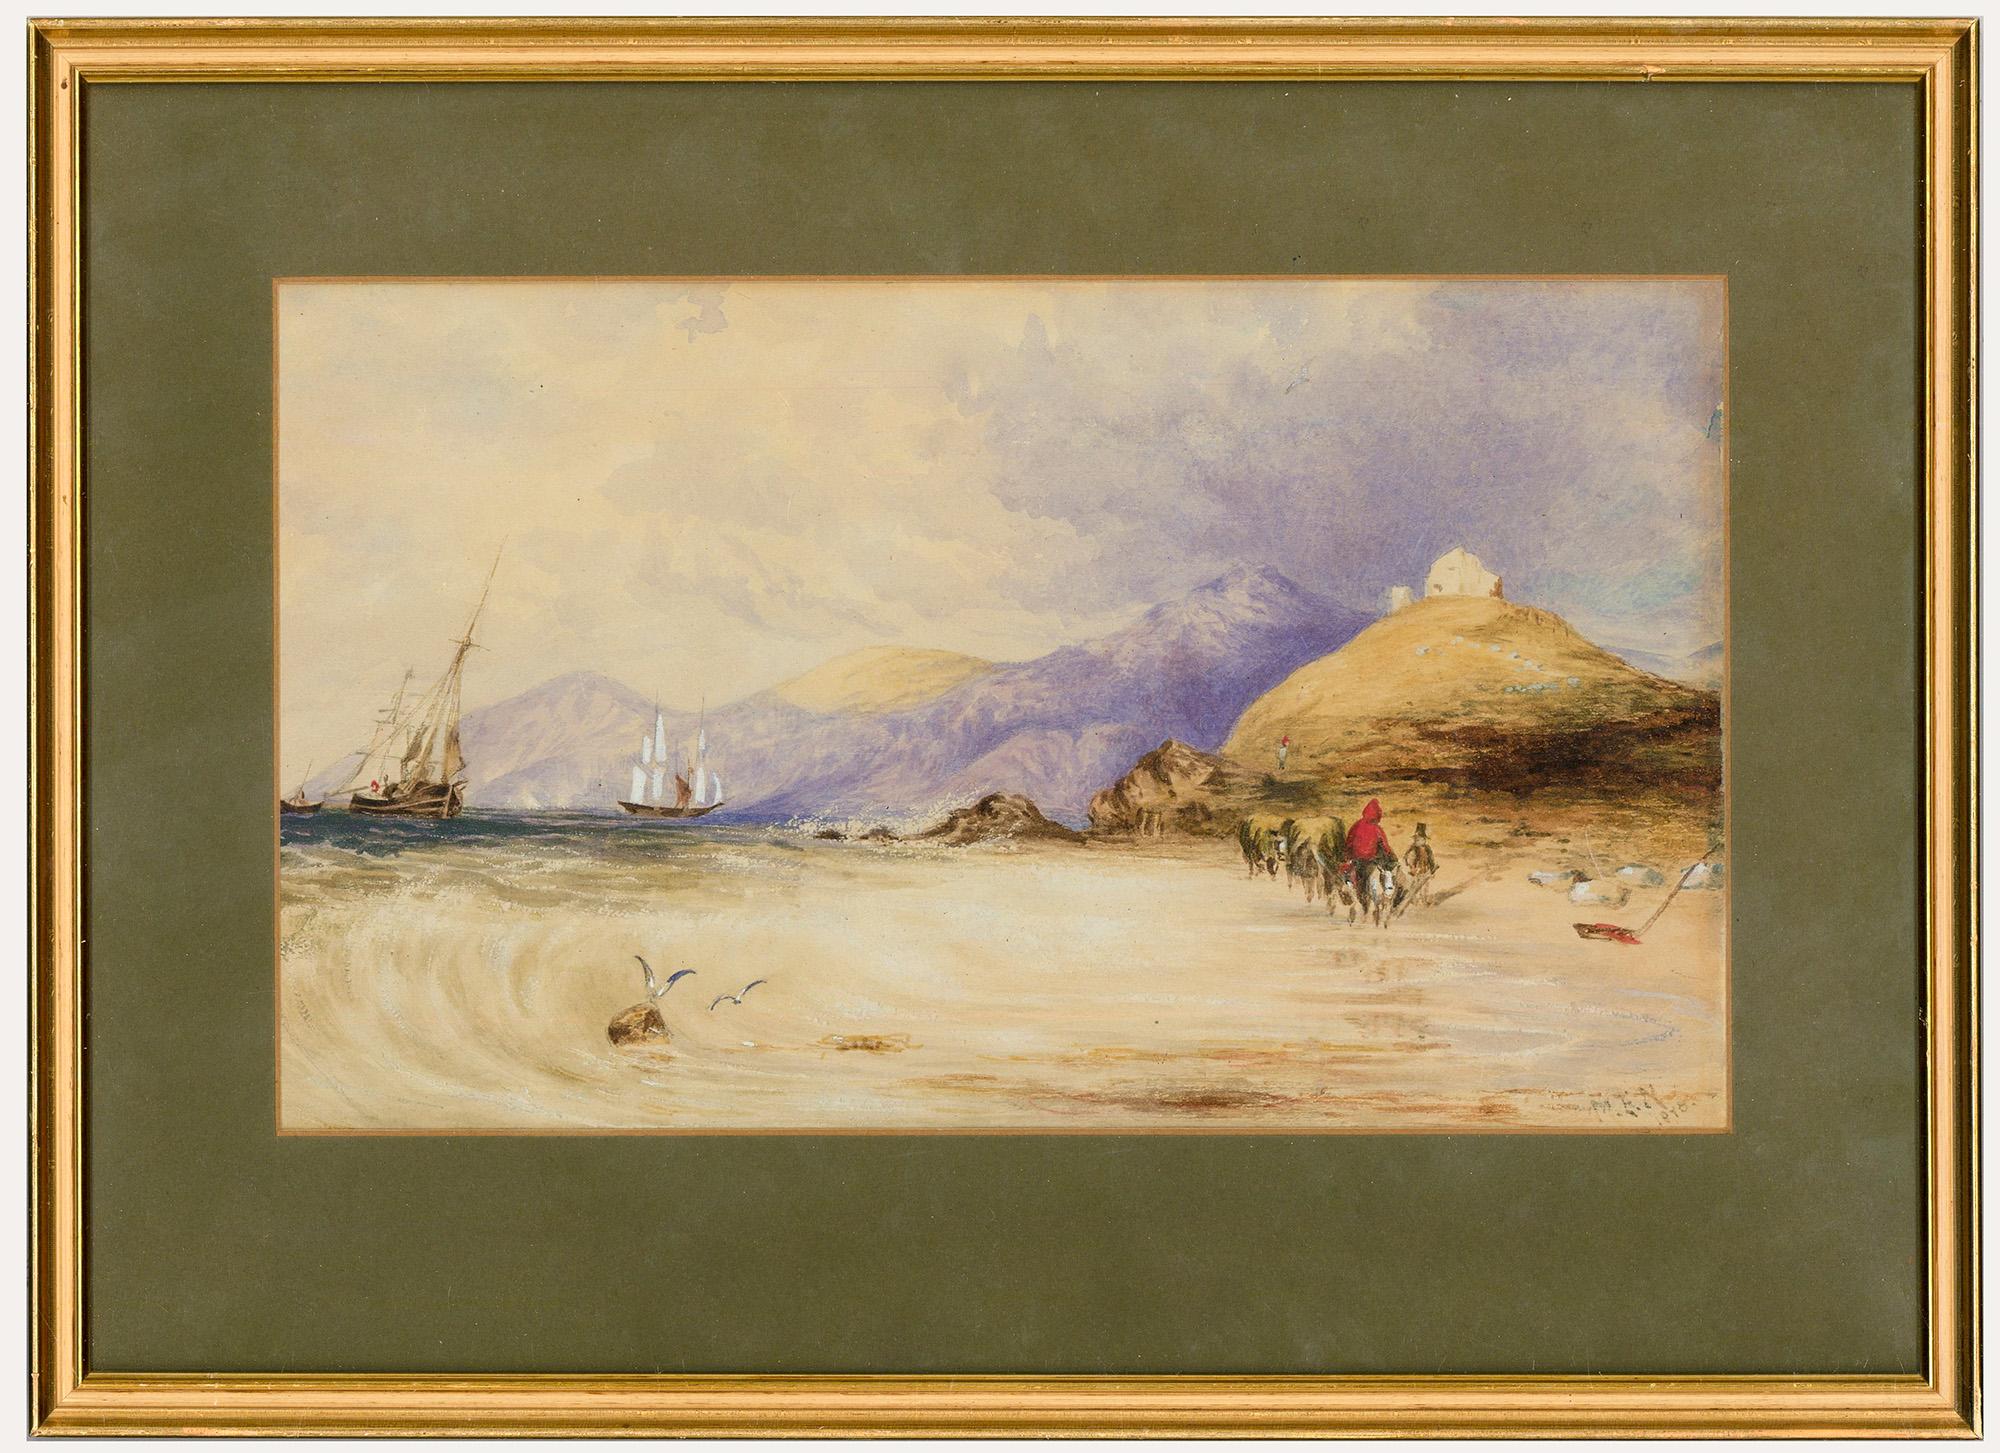 A charming watercolour scene depicting clippers sailing the coastline. In the foreground figures lead donkeys across the sand. Signed and dated to the lower right. Presented in a gilt frame. On paper. 